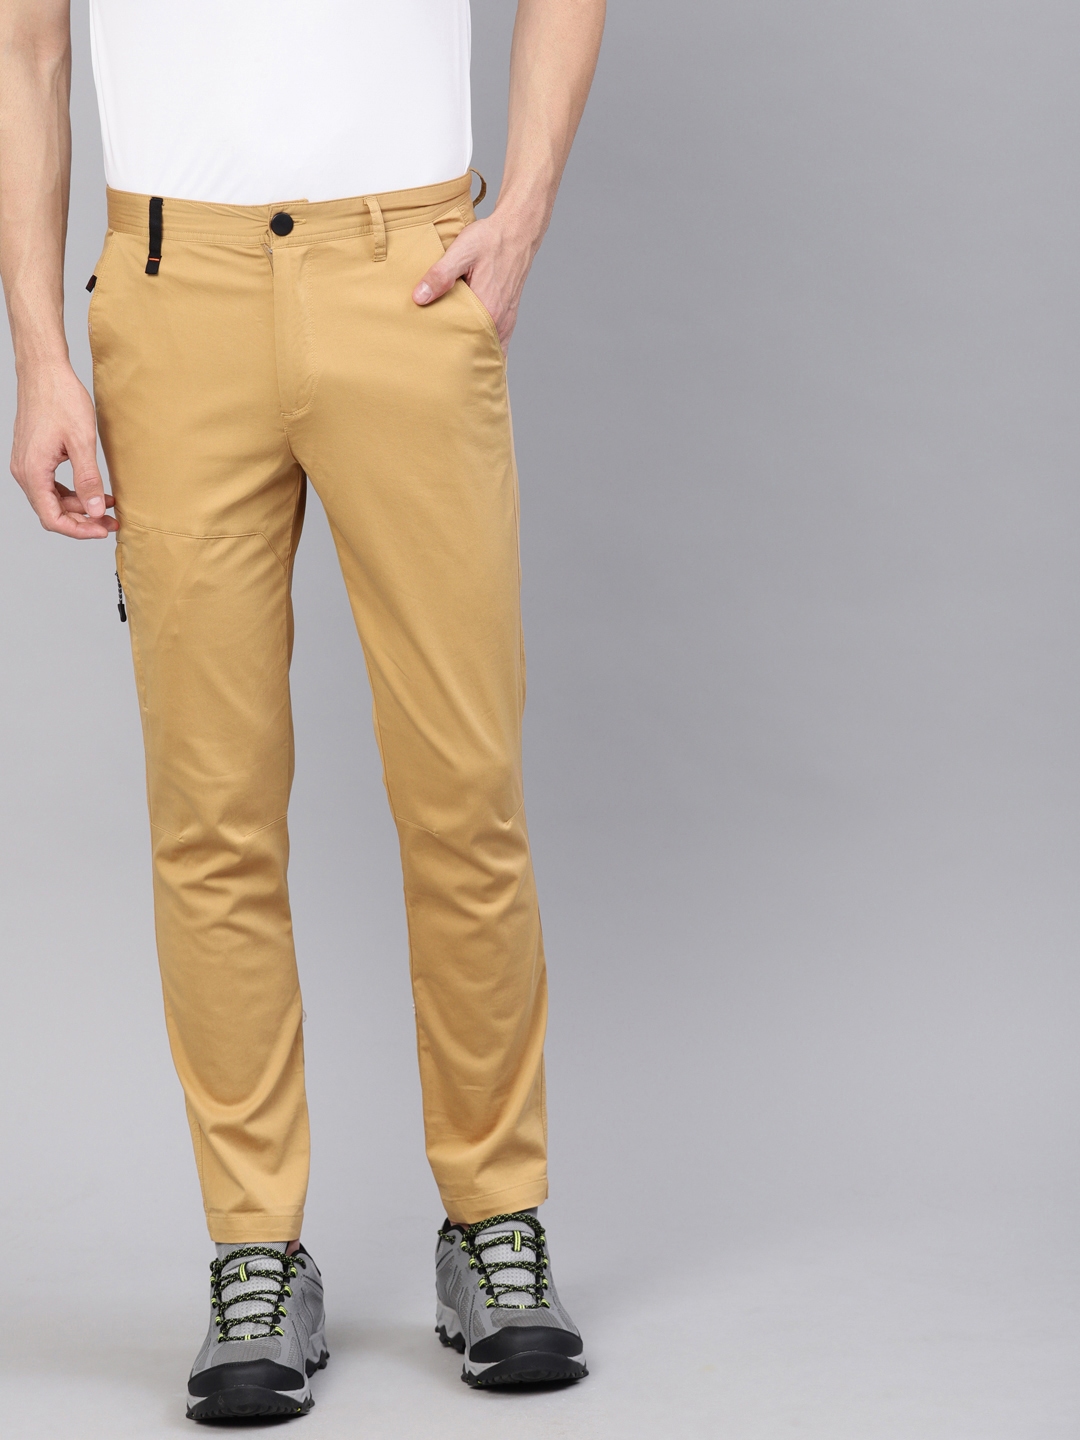 Hrx Casual Trousers  Buy Hrx Casual Trousers online in India